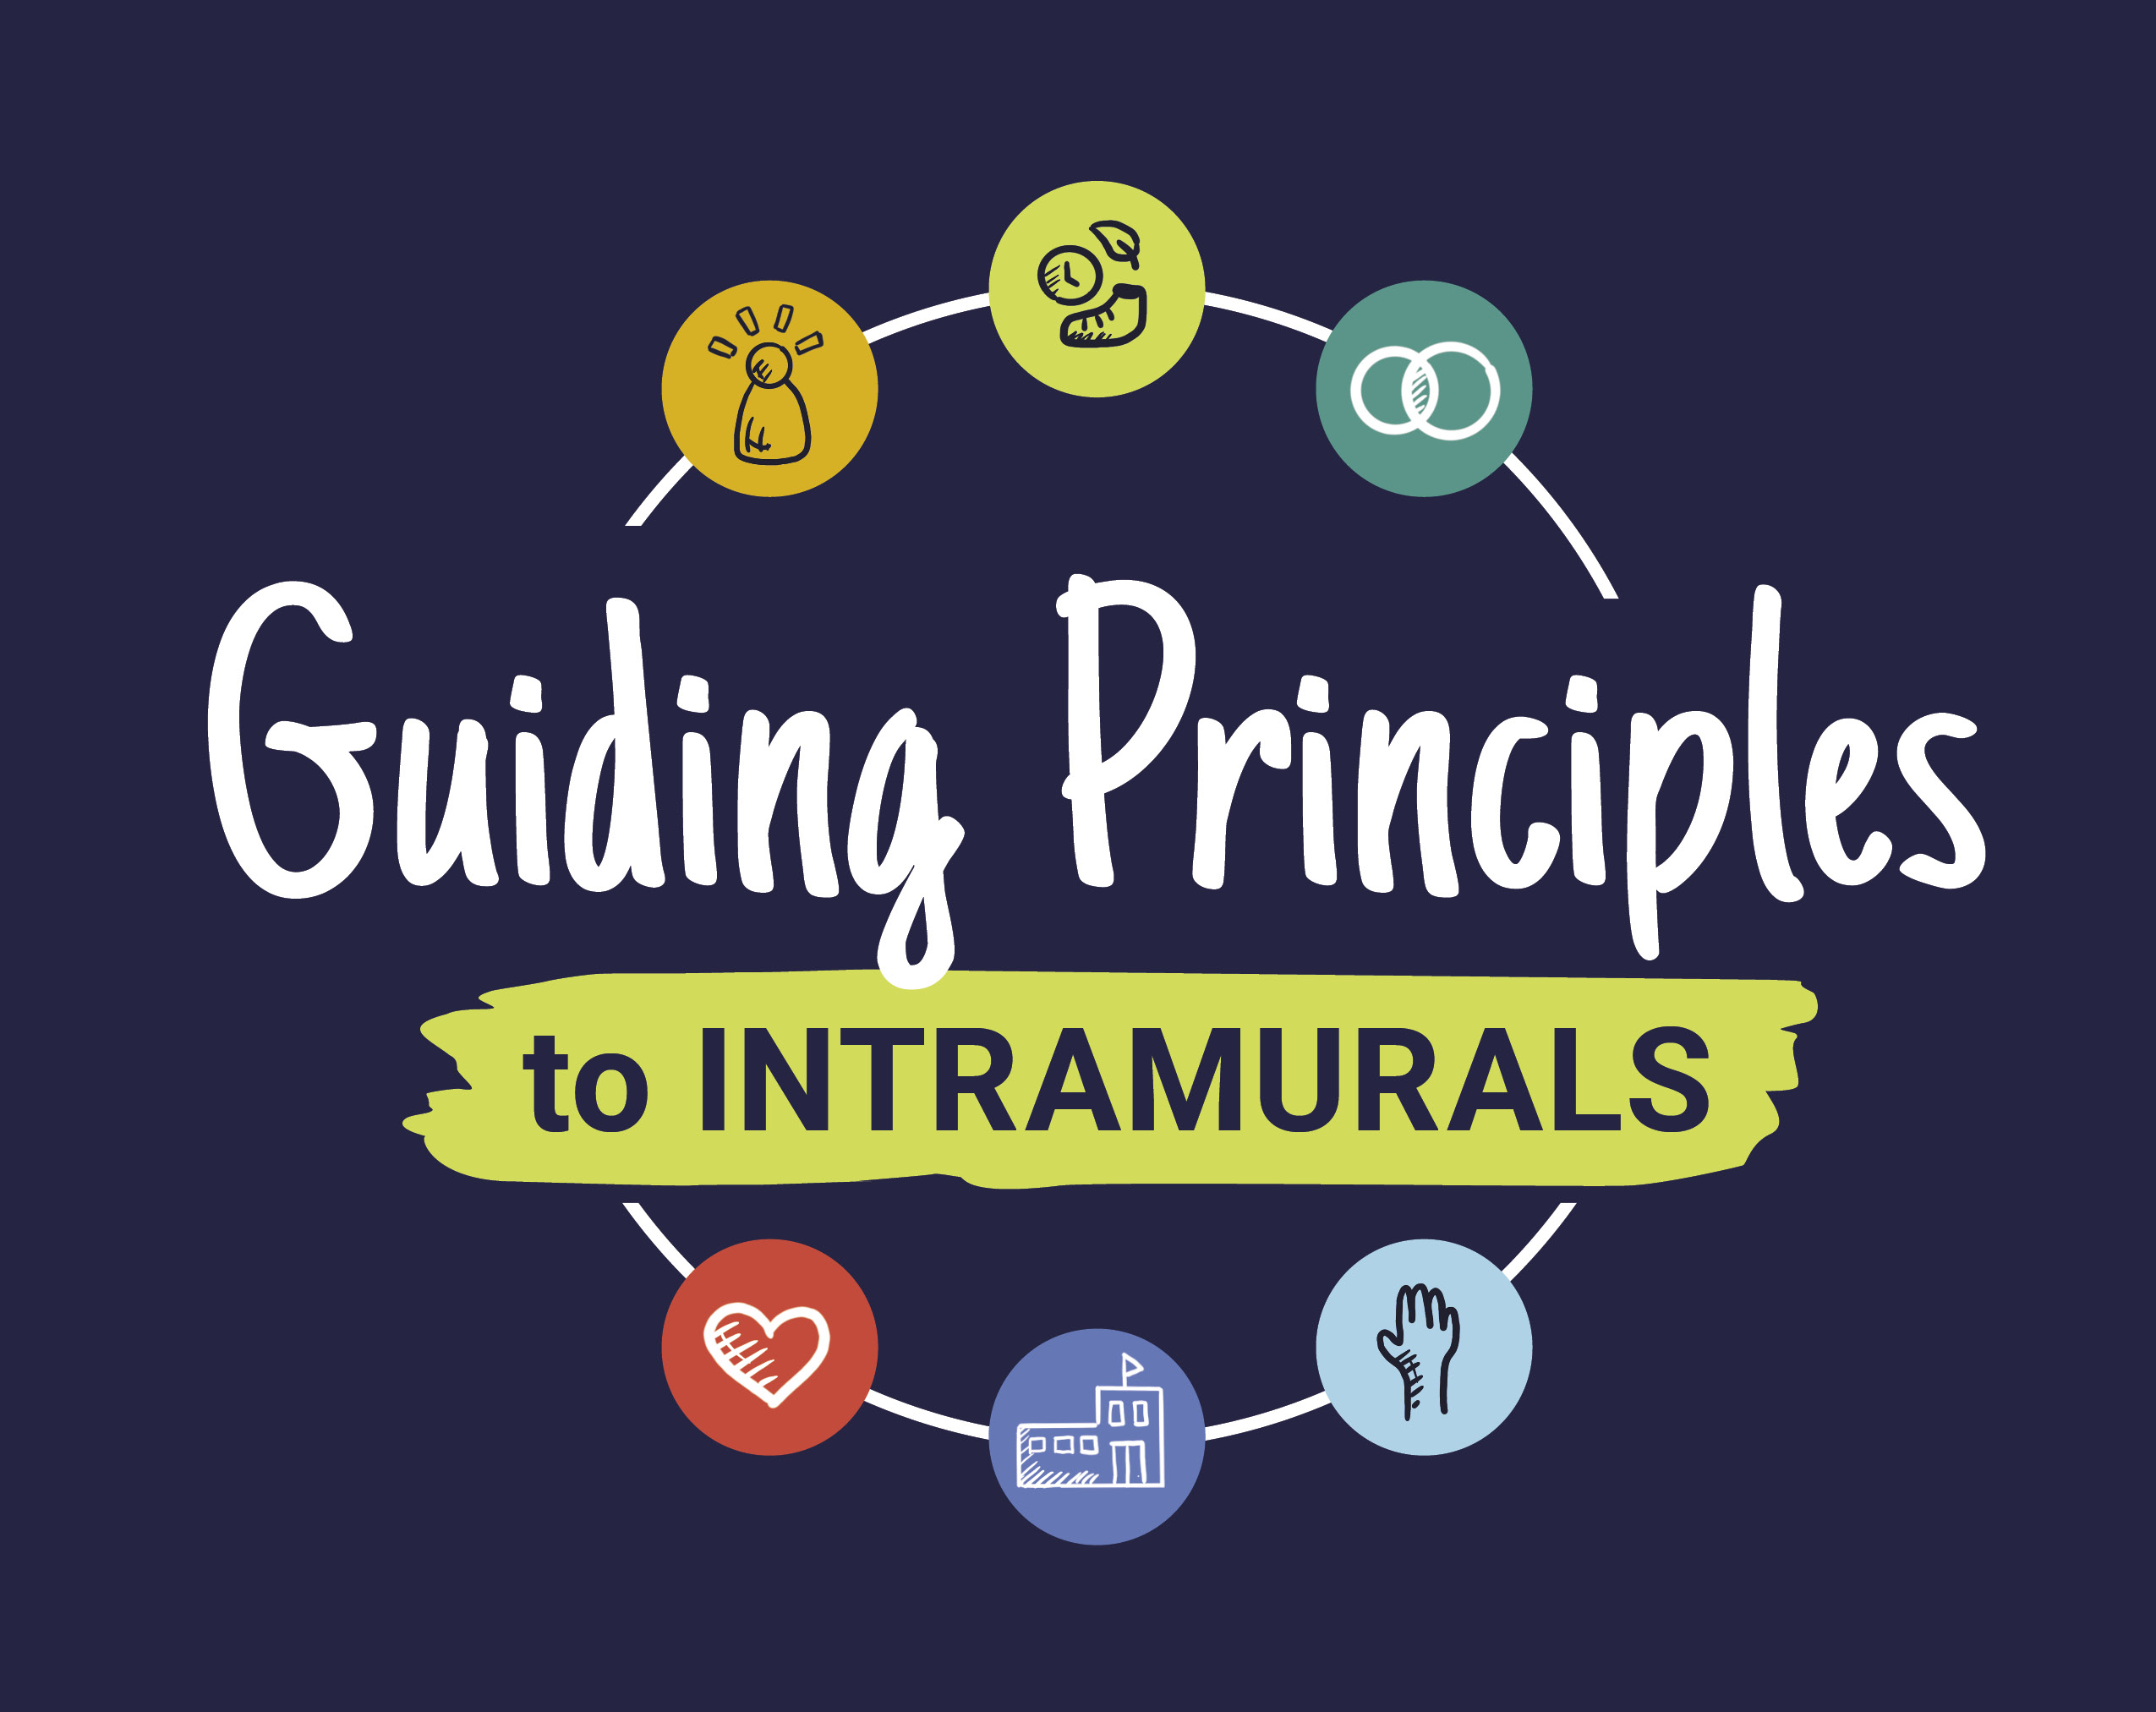 Guiding Principles for Intramurals Graphic: Text "Guiding Principles to Intramurals" appears in the centre of a circle with six colourful icons, three above text and three below.  Each icon represents a different Guiding Principle.